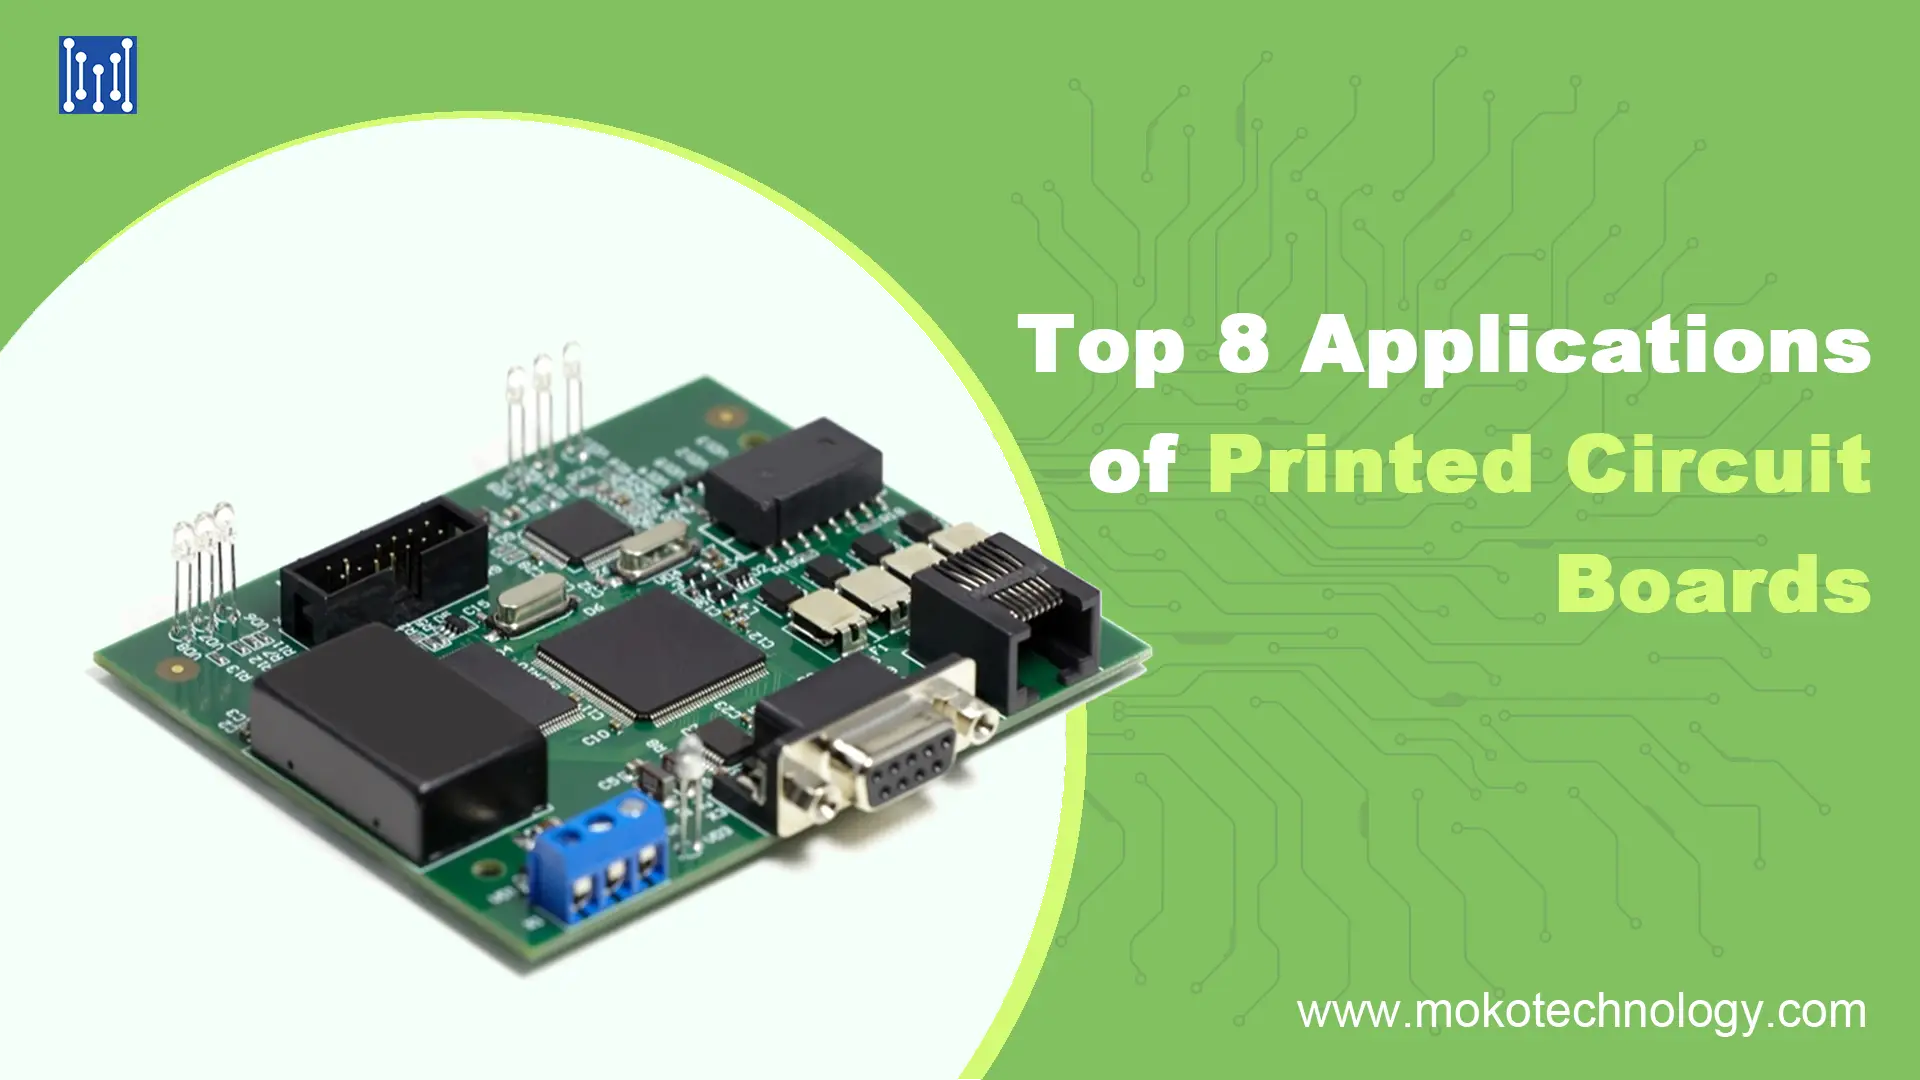 Top 8 Applications of Printed Circuit Boards